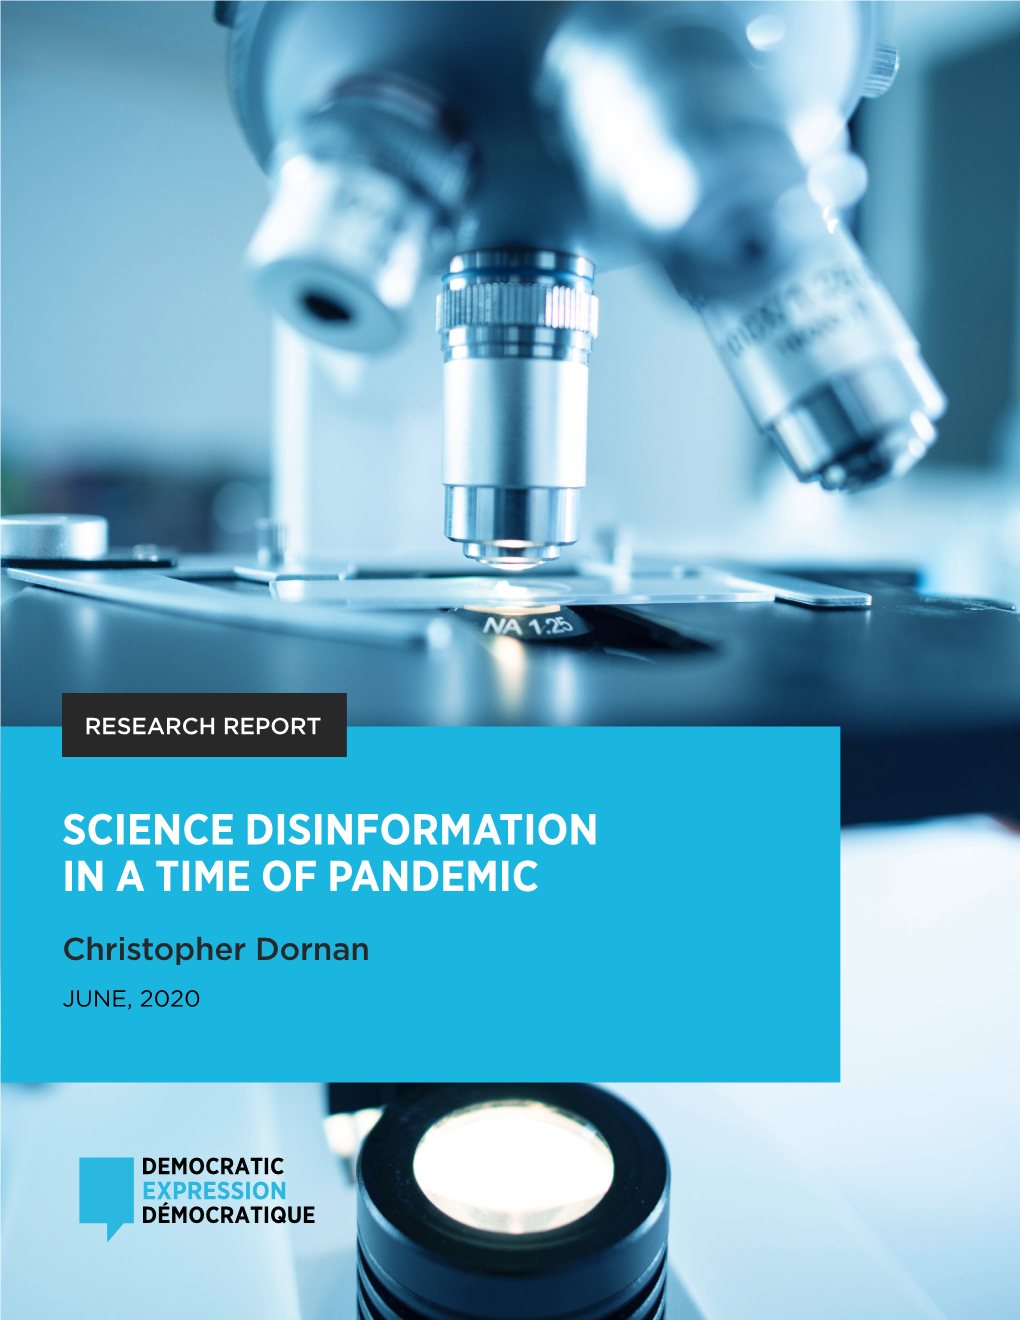 Science Disinformation in a Time of Pandemic